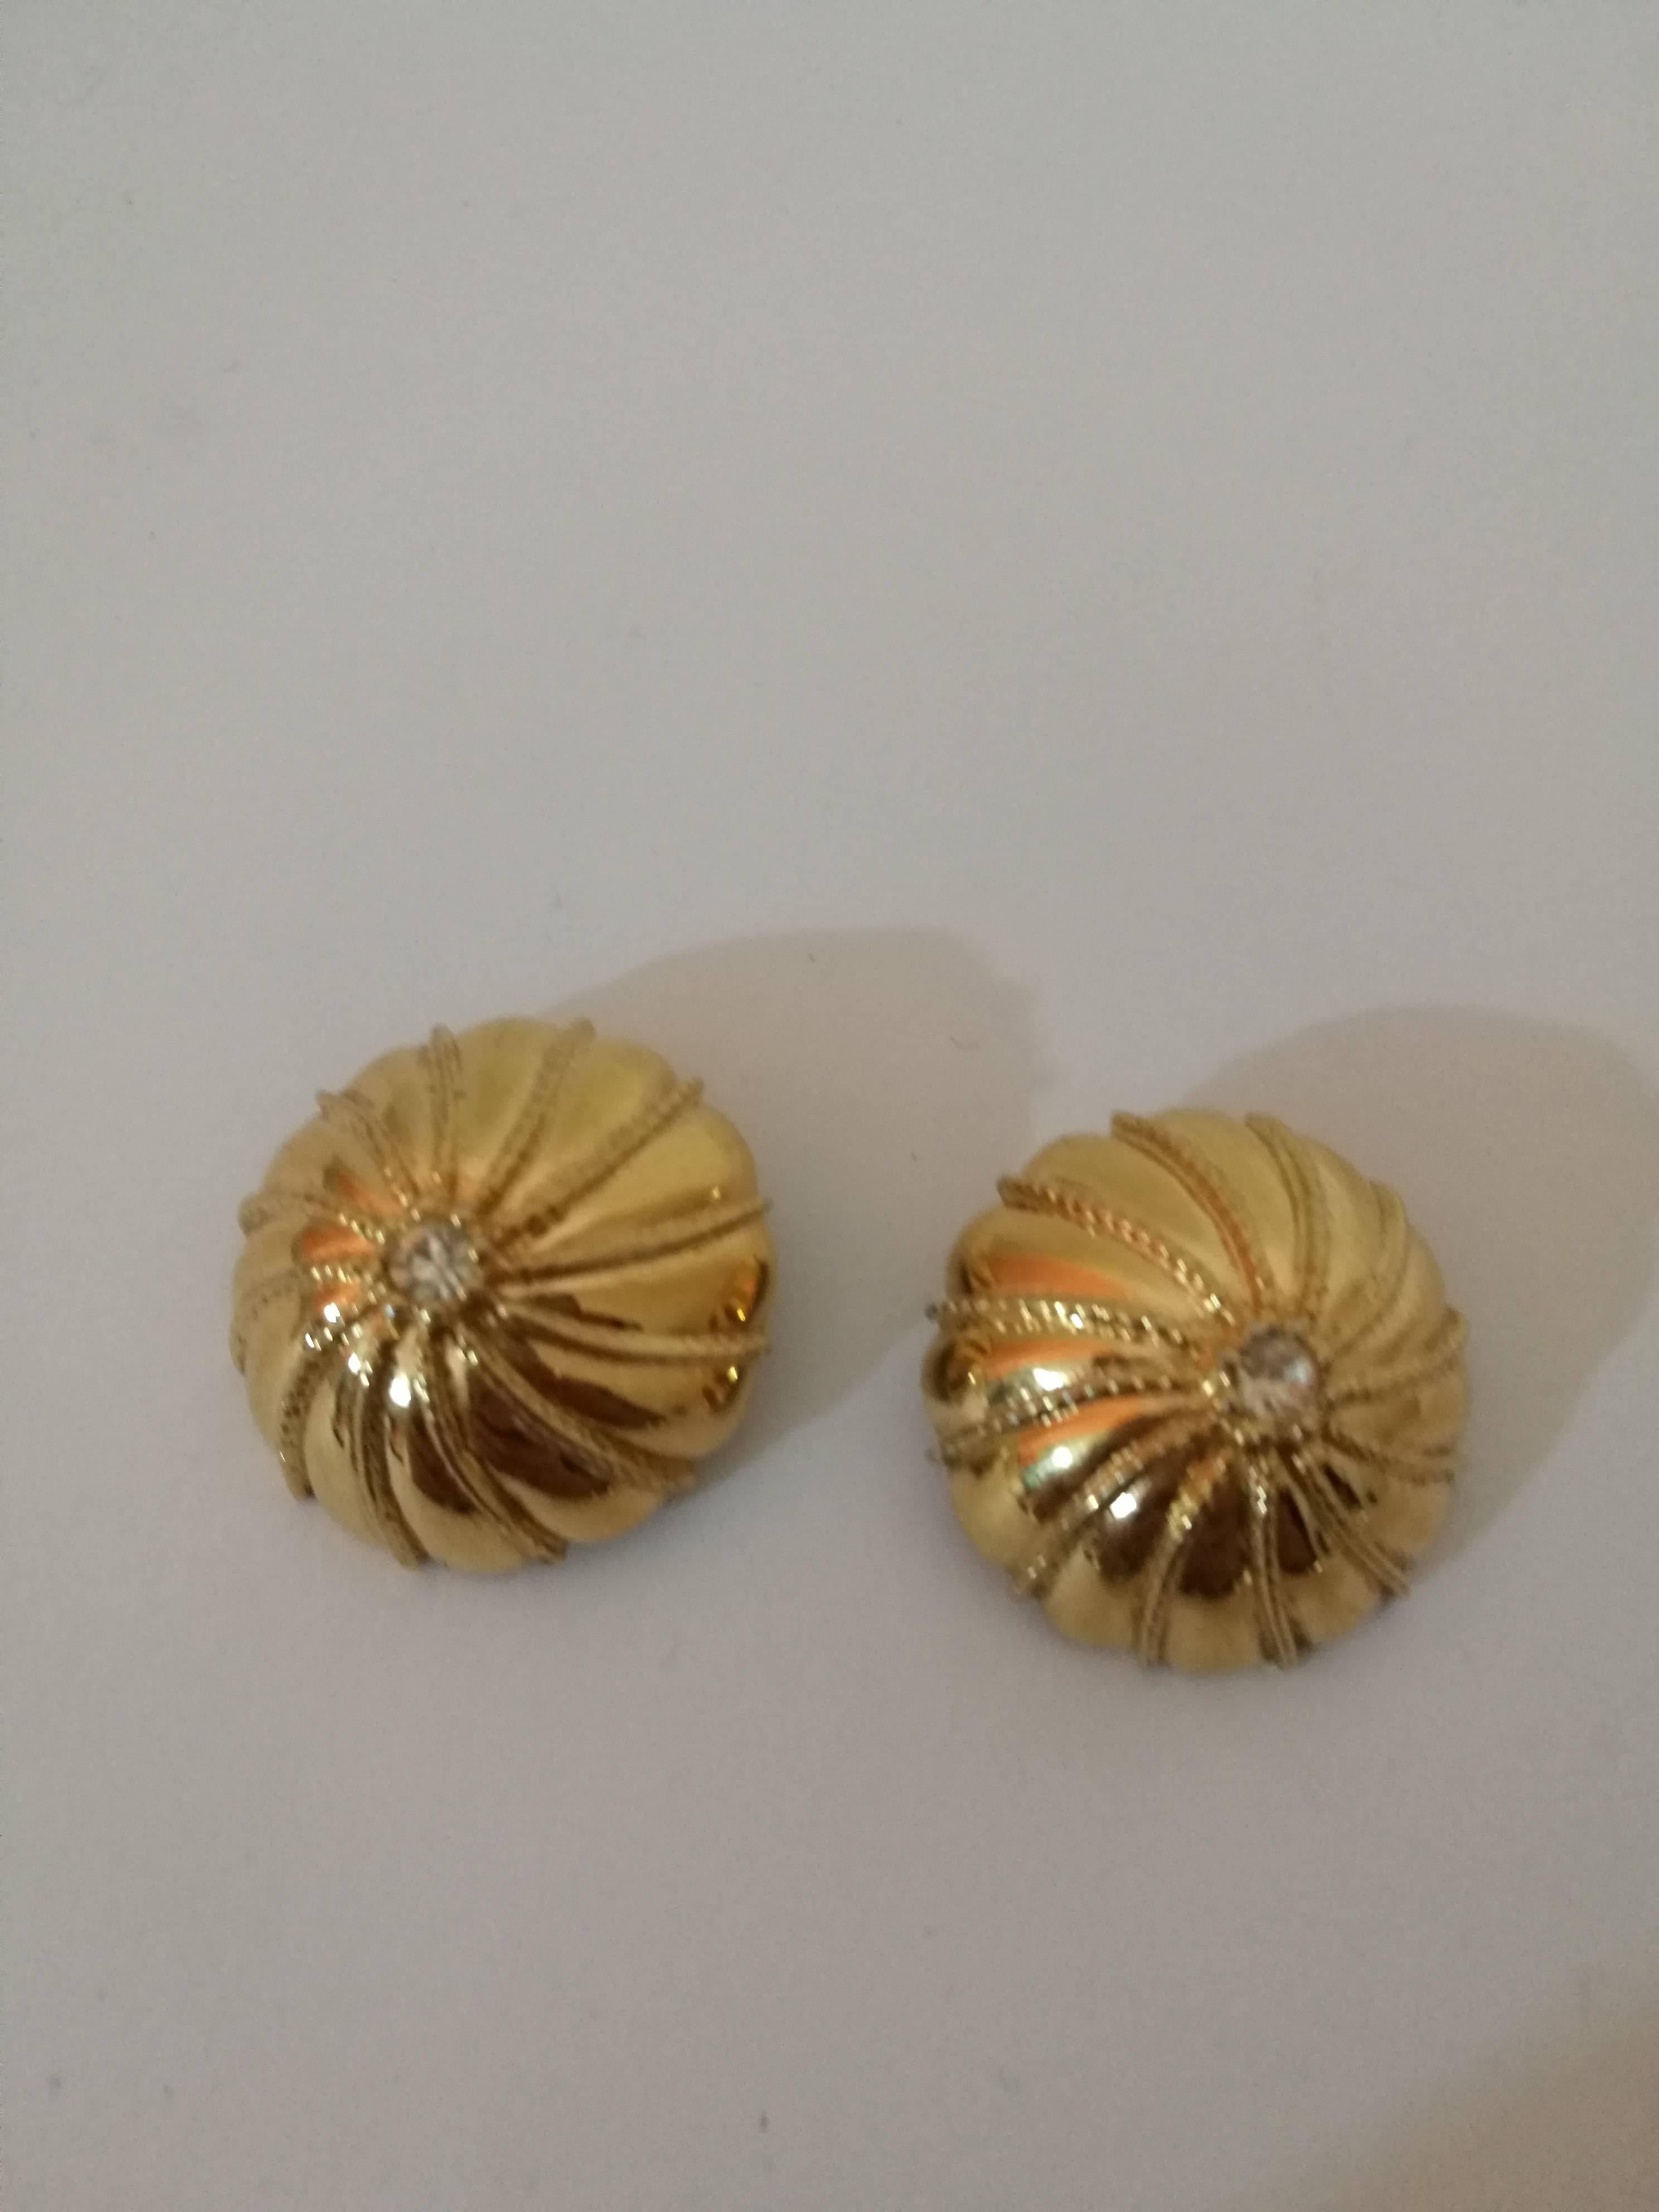 Nina Ricci gold Tone Clip-on earrings

Crystal round tone swarovski in the middle
Totally made in italy 
Measurements: 3 cm * 3 cm